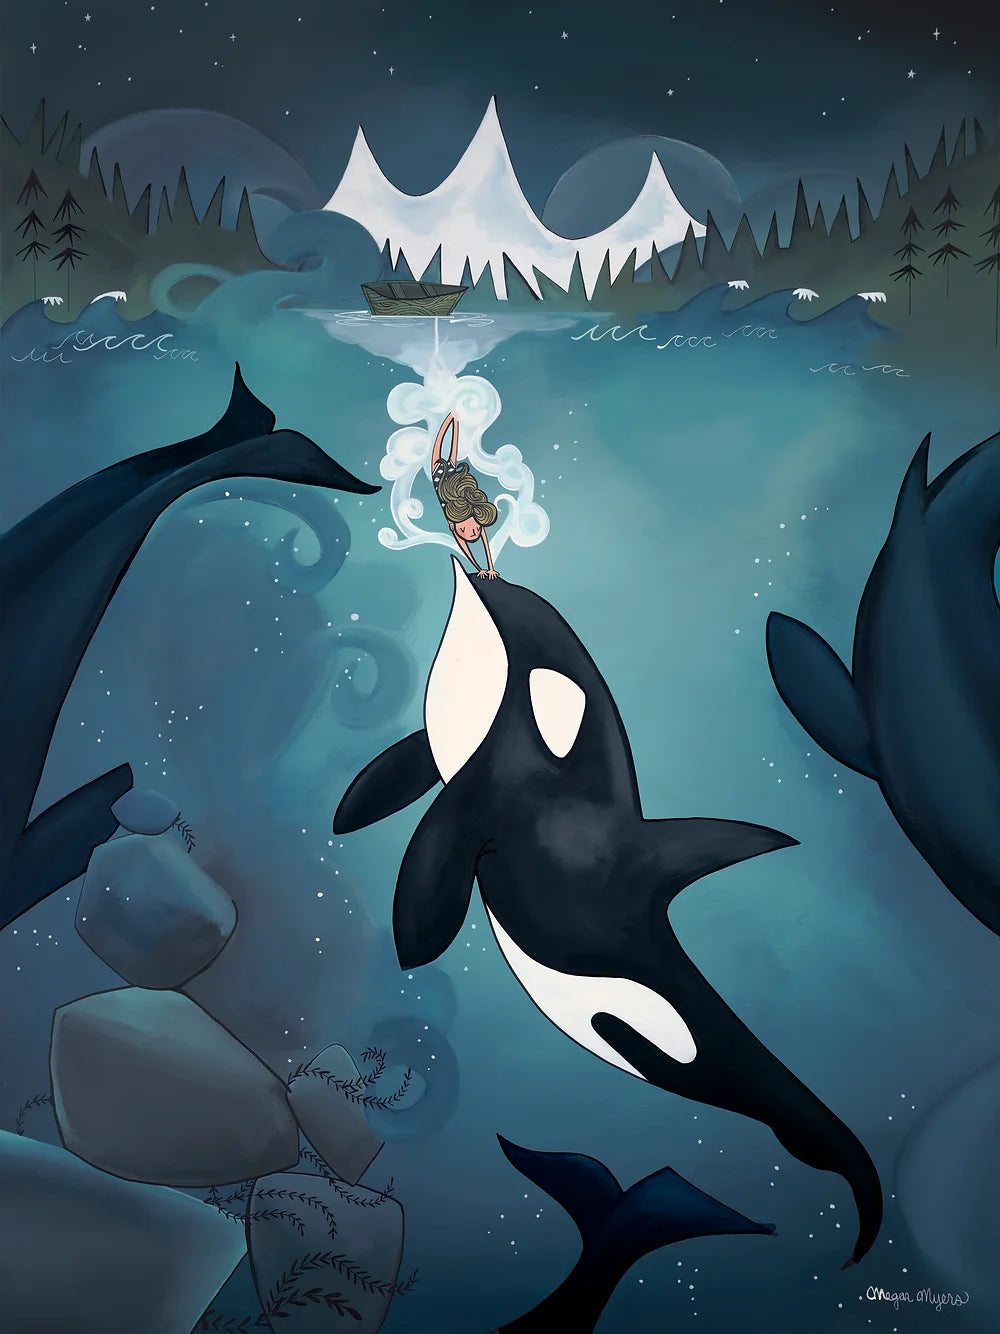 Orca Diving Girl - The night sky is you #52 by Megan Marie Myers